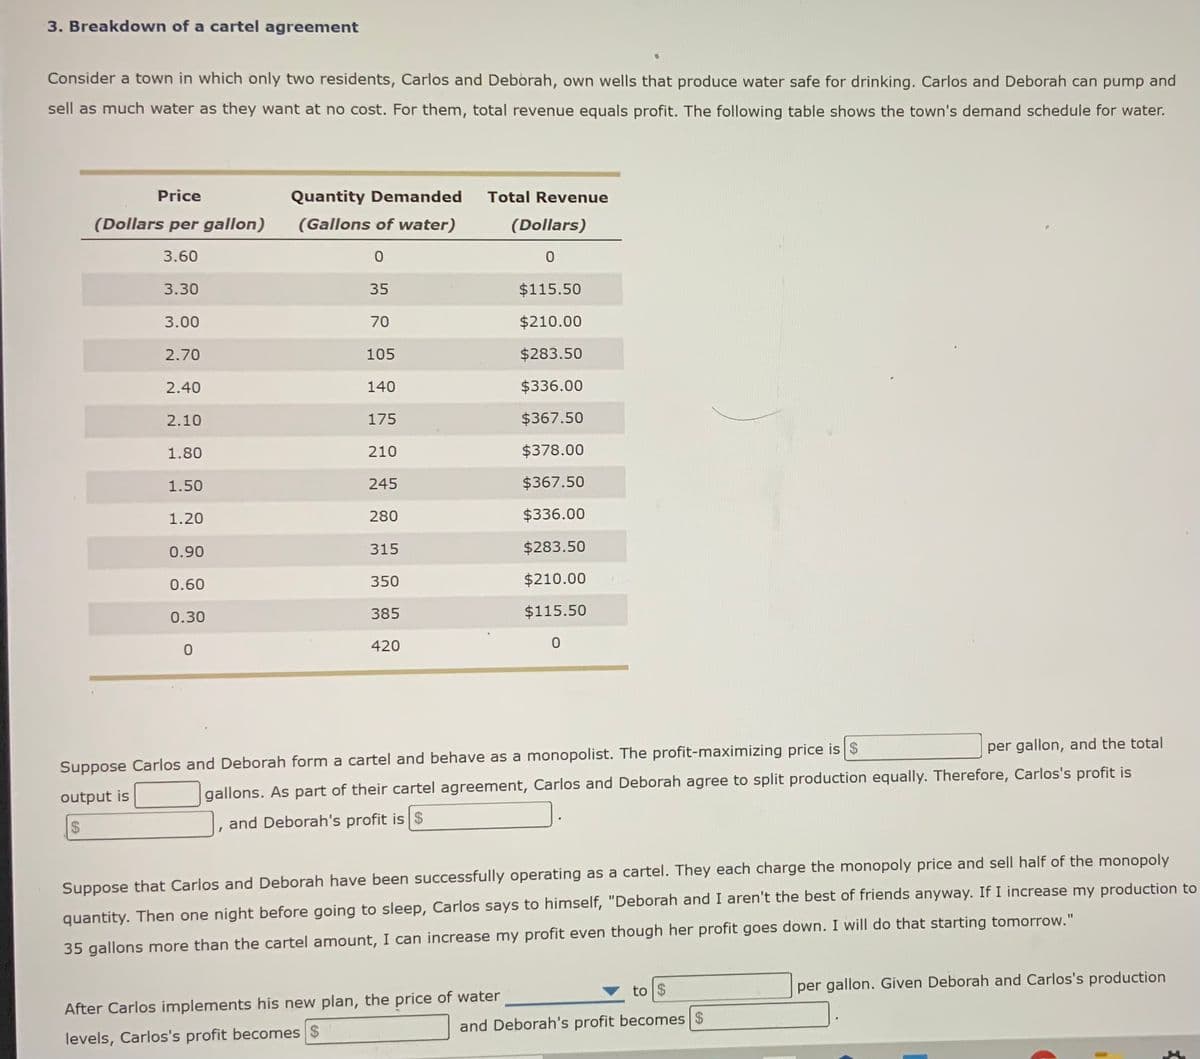 3. Breakdown of a cartel agreement
Consider a town in which only two residents, Carlos and Deborah, own wells that produce water safe for drinking. Carlos and Deborah can pump and
sell as much water as they want at no cost. For them, total revenue equals profit. The following table shows the town's demand schedule for water.
Price
Quantity Demanded
Total Revenue
(Dollars per gallon)
(Gallons of water)
(Dollars)
3.60
3.30
35
$115.50
3.00
70
$210.00
2.70
105
$283.50
2.40
140
$336.00
2.10
175
$367.50
1.80
210
$378.00
1.50
245
$367.50
1.20
280
$336.00
0.90
315
$283.50
0.60
350
$210.00
0.30
385
$115.50
420
per gallon, and the total
Suppose Carlos and Deborah form a cartel and behave as a monopolist. The profit-maximizing price is $
output is
gallons. As part of their cartel agreement, Carlos and Deborah agree to split production equally. Therefore, Carlos's profit is
24
and Deborah's profit is $
orice and sell half of the monopoly
Suppose that Carlos and Deborah have been successfully operating as a cartel. They each charge the monopoly
quantity. Then one night before going to sleep, Carlos says to himself, "Deborah and I aren't the best of friends anyway. If I increase my production to
35 gallons more than the cartel amount, I can increase my profit even though her profit goes down. I will do that starting tomorrow."
to $
per gallon. Given Deborah and Carlos's production
After Carlos implements his new plan, the price of water
and Deborah's profit becomes $
levels, Carlos's profit becomes $
